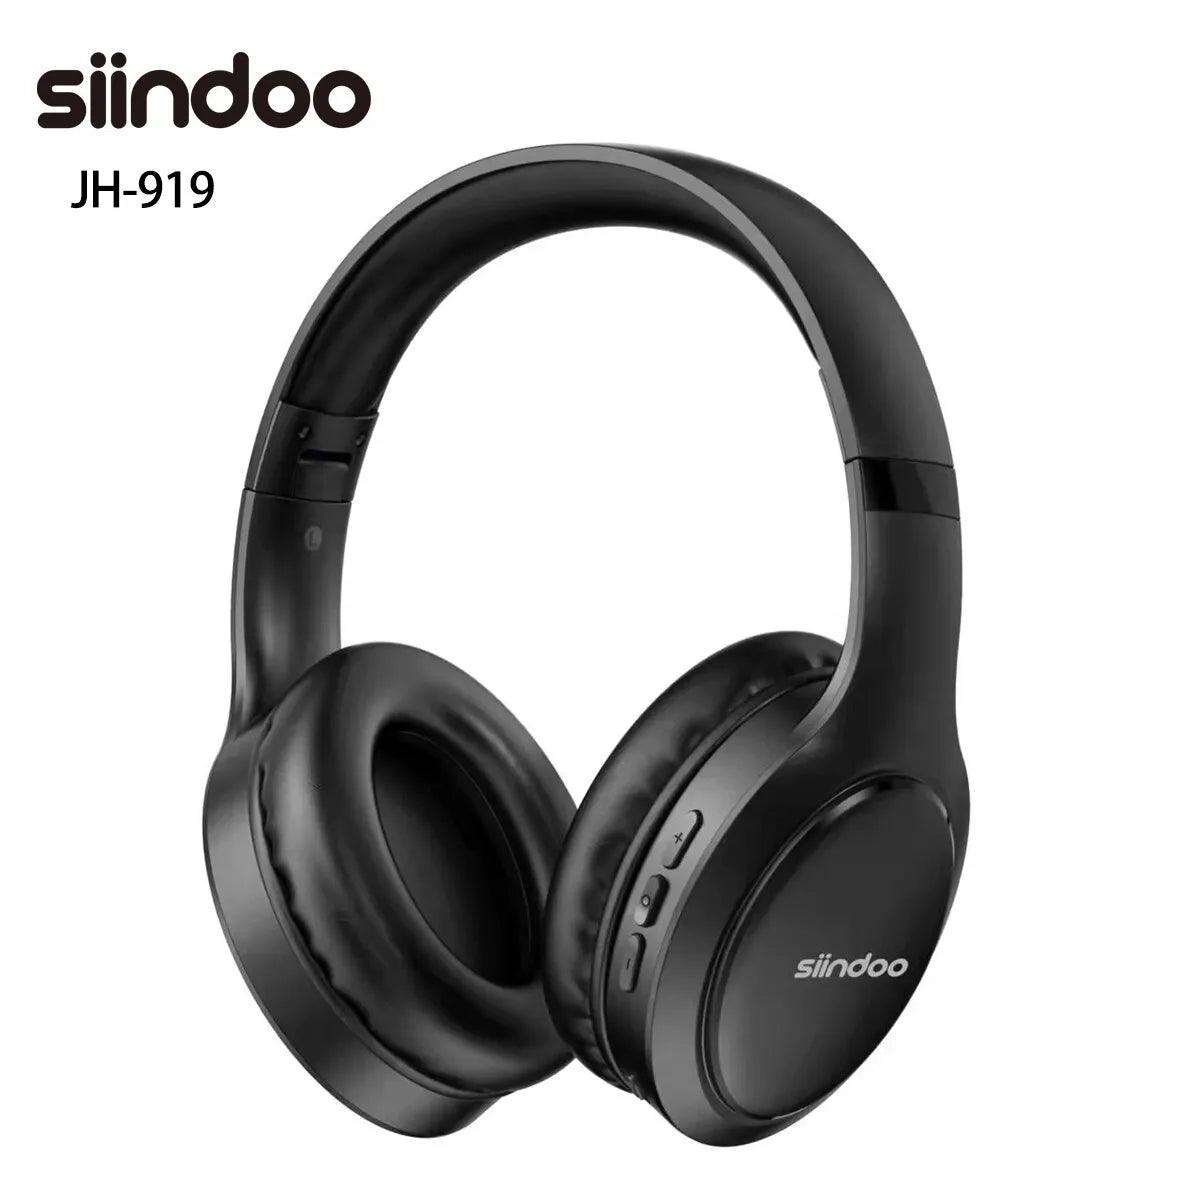 Siindoo JH919 Wireless Bluetooth Headphones with Super Bass and Mic - Premium Sound Quality and Comfort  ourlum.com Black  